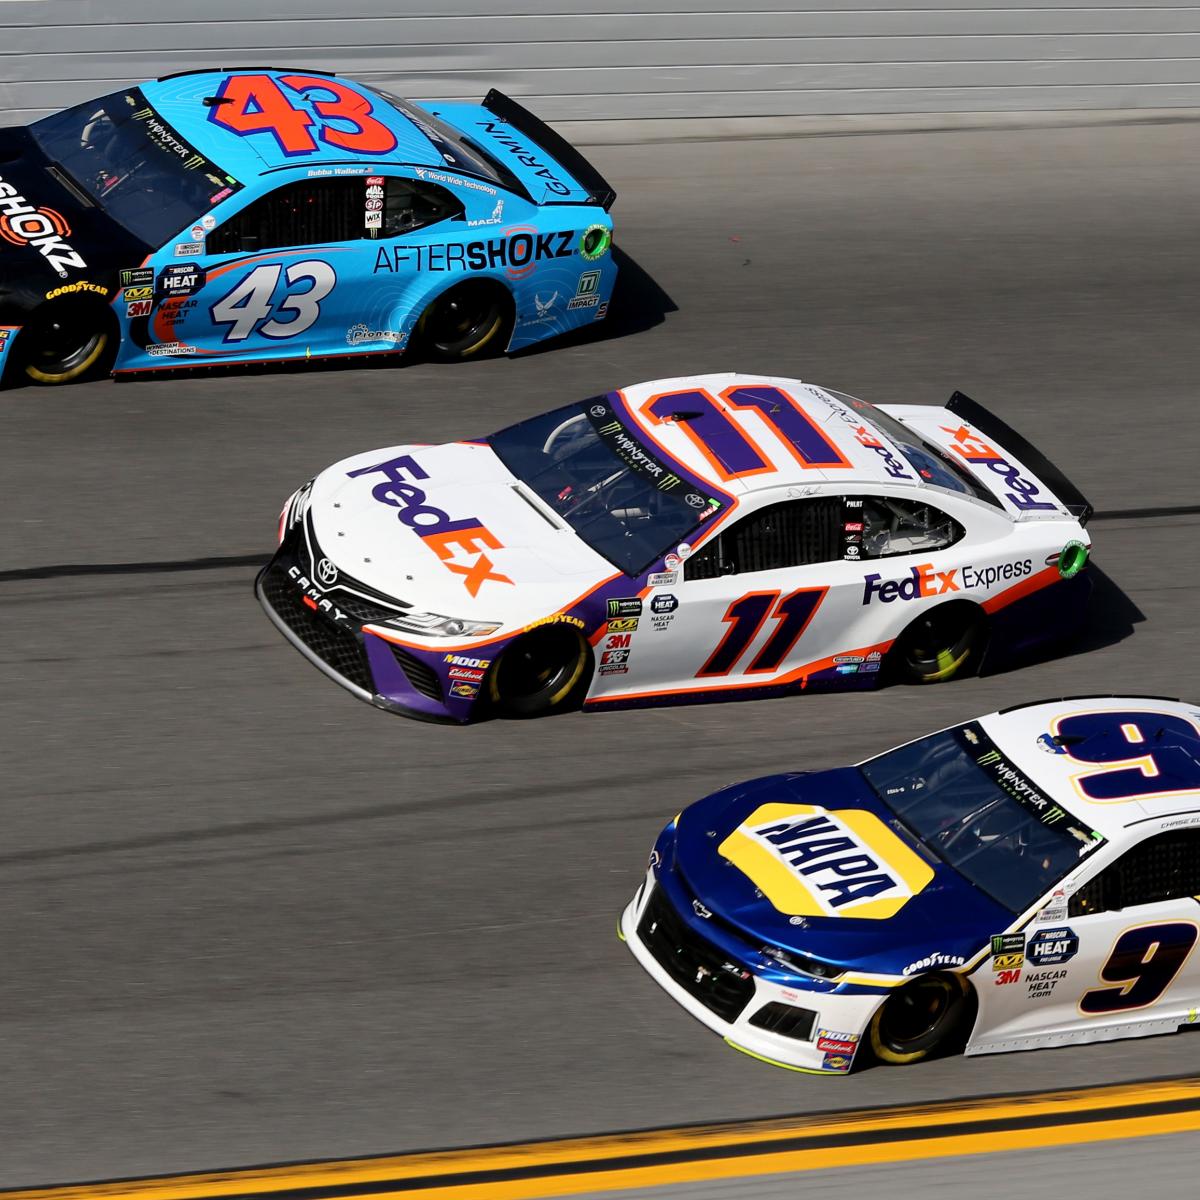 Daytona 500 Schedule 2020: TV Coverage and Schedule for NASCAR Season Opener ...3 日前